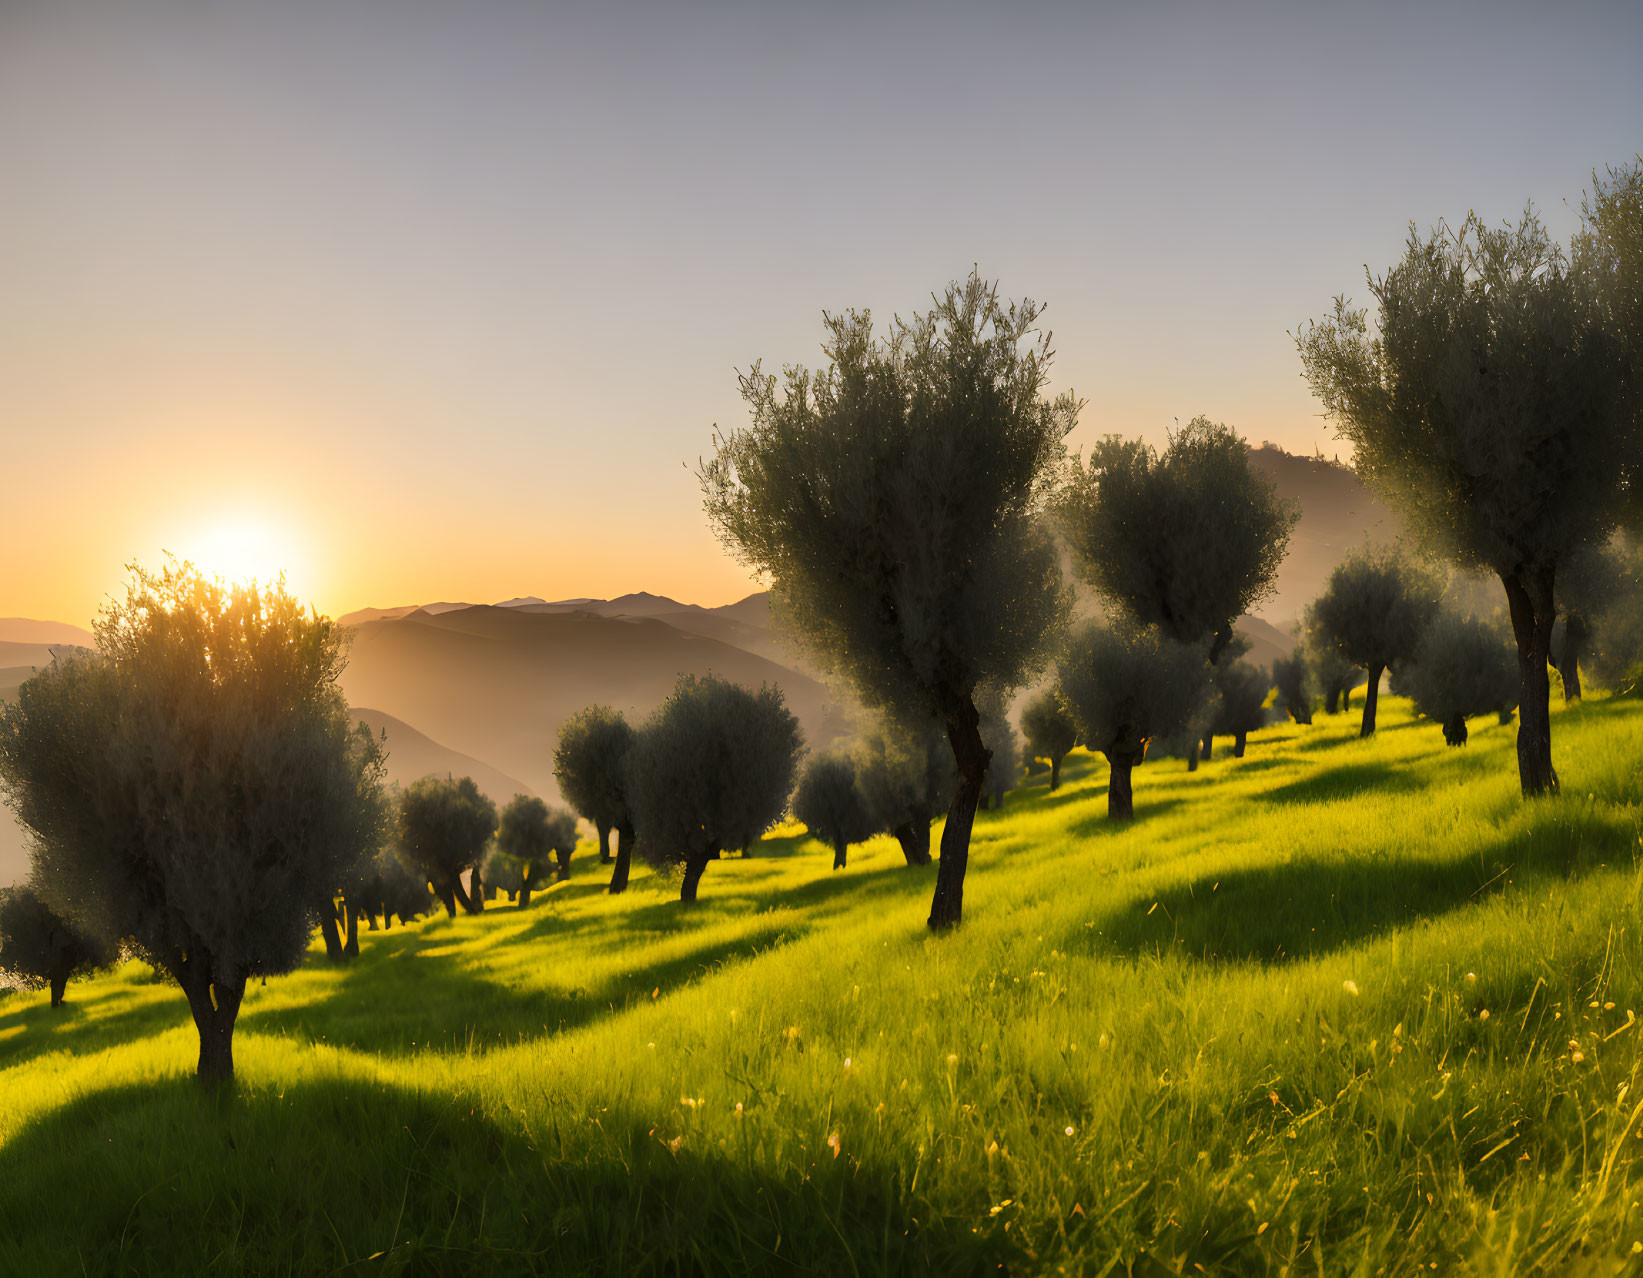 Among the olive trees